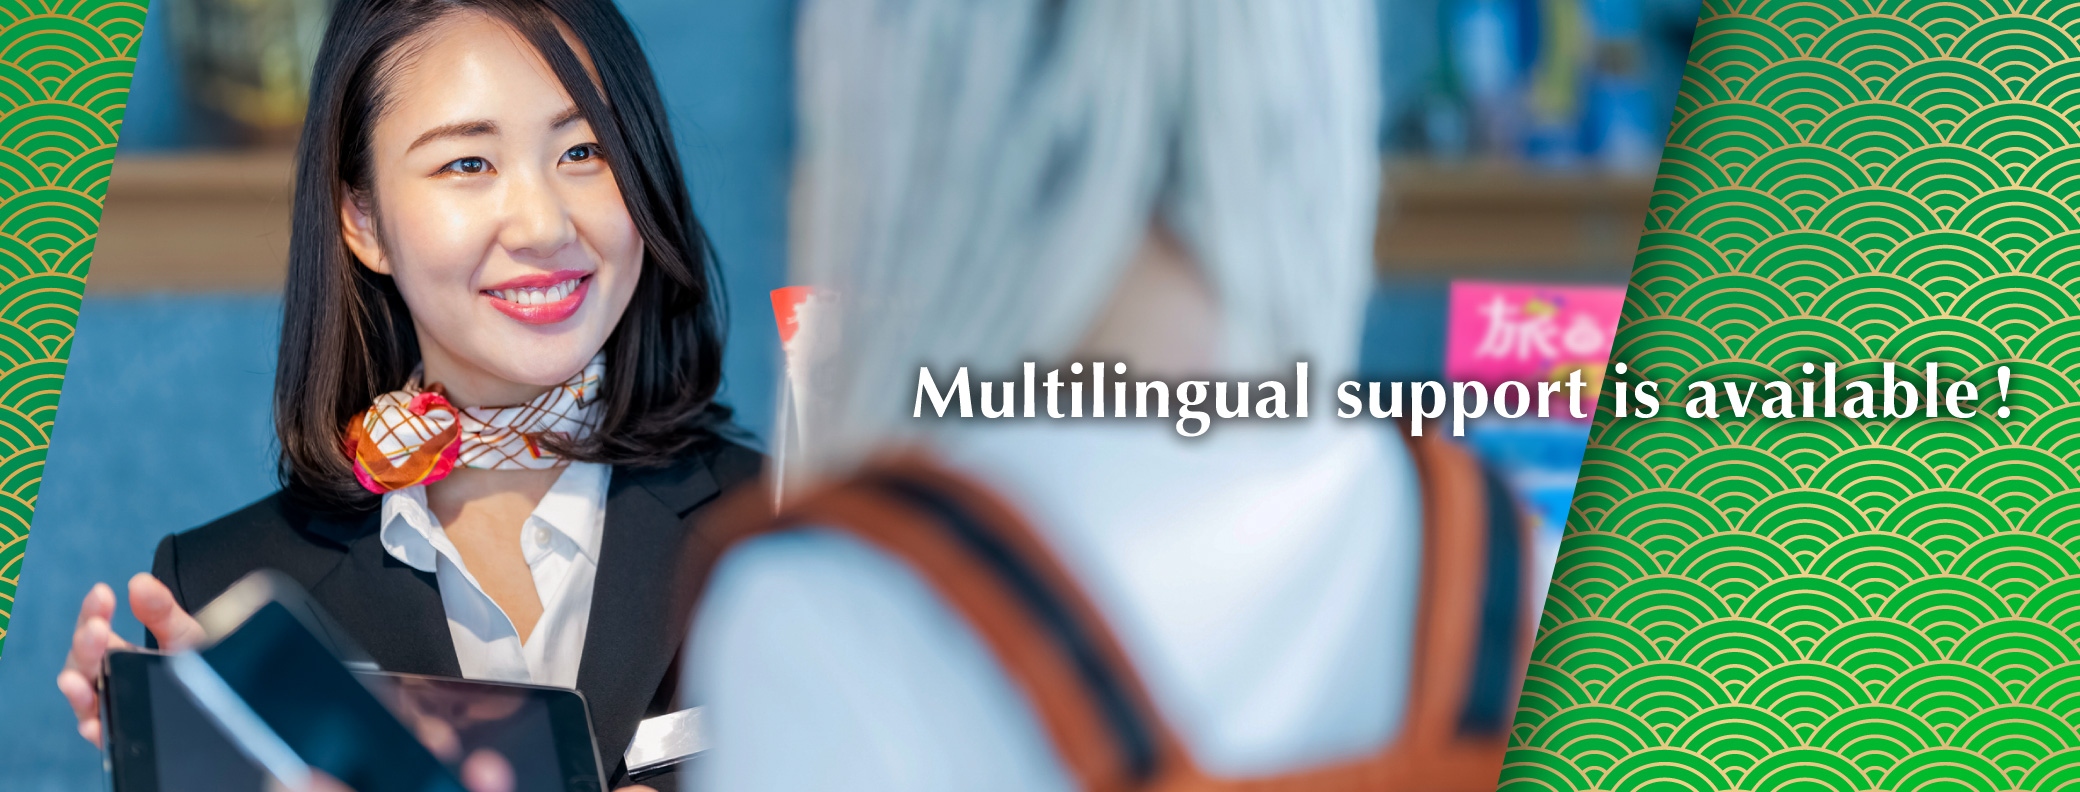 Multilingual support is available!